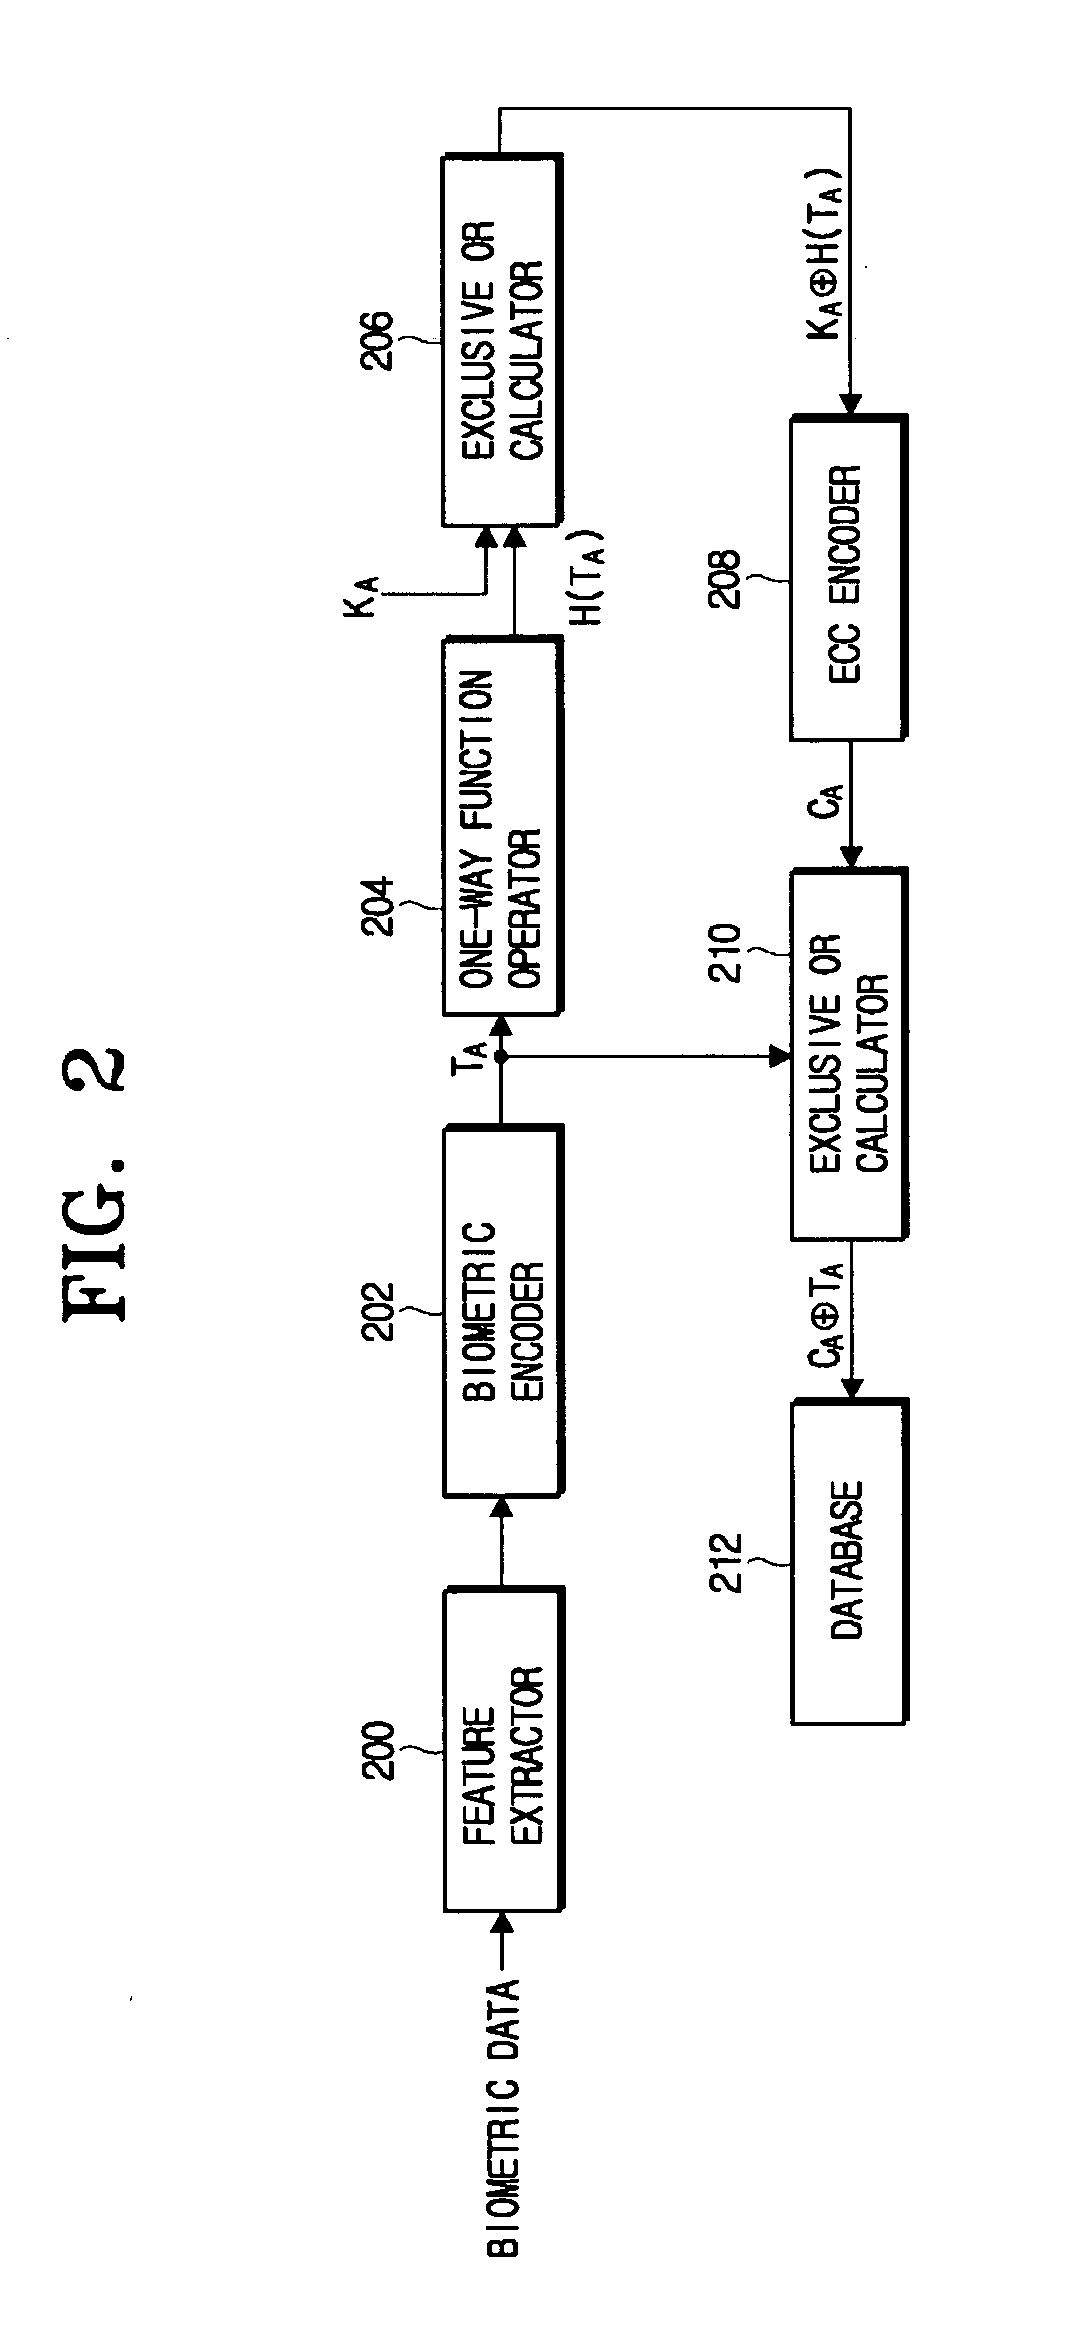 Method and apparatus for generating cryptographic key using biometric data